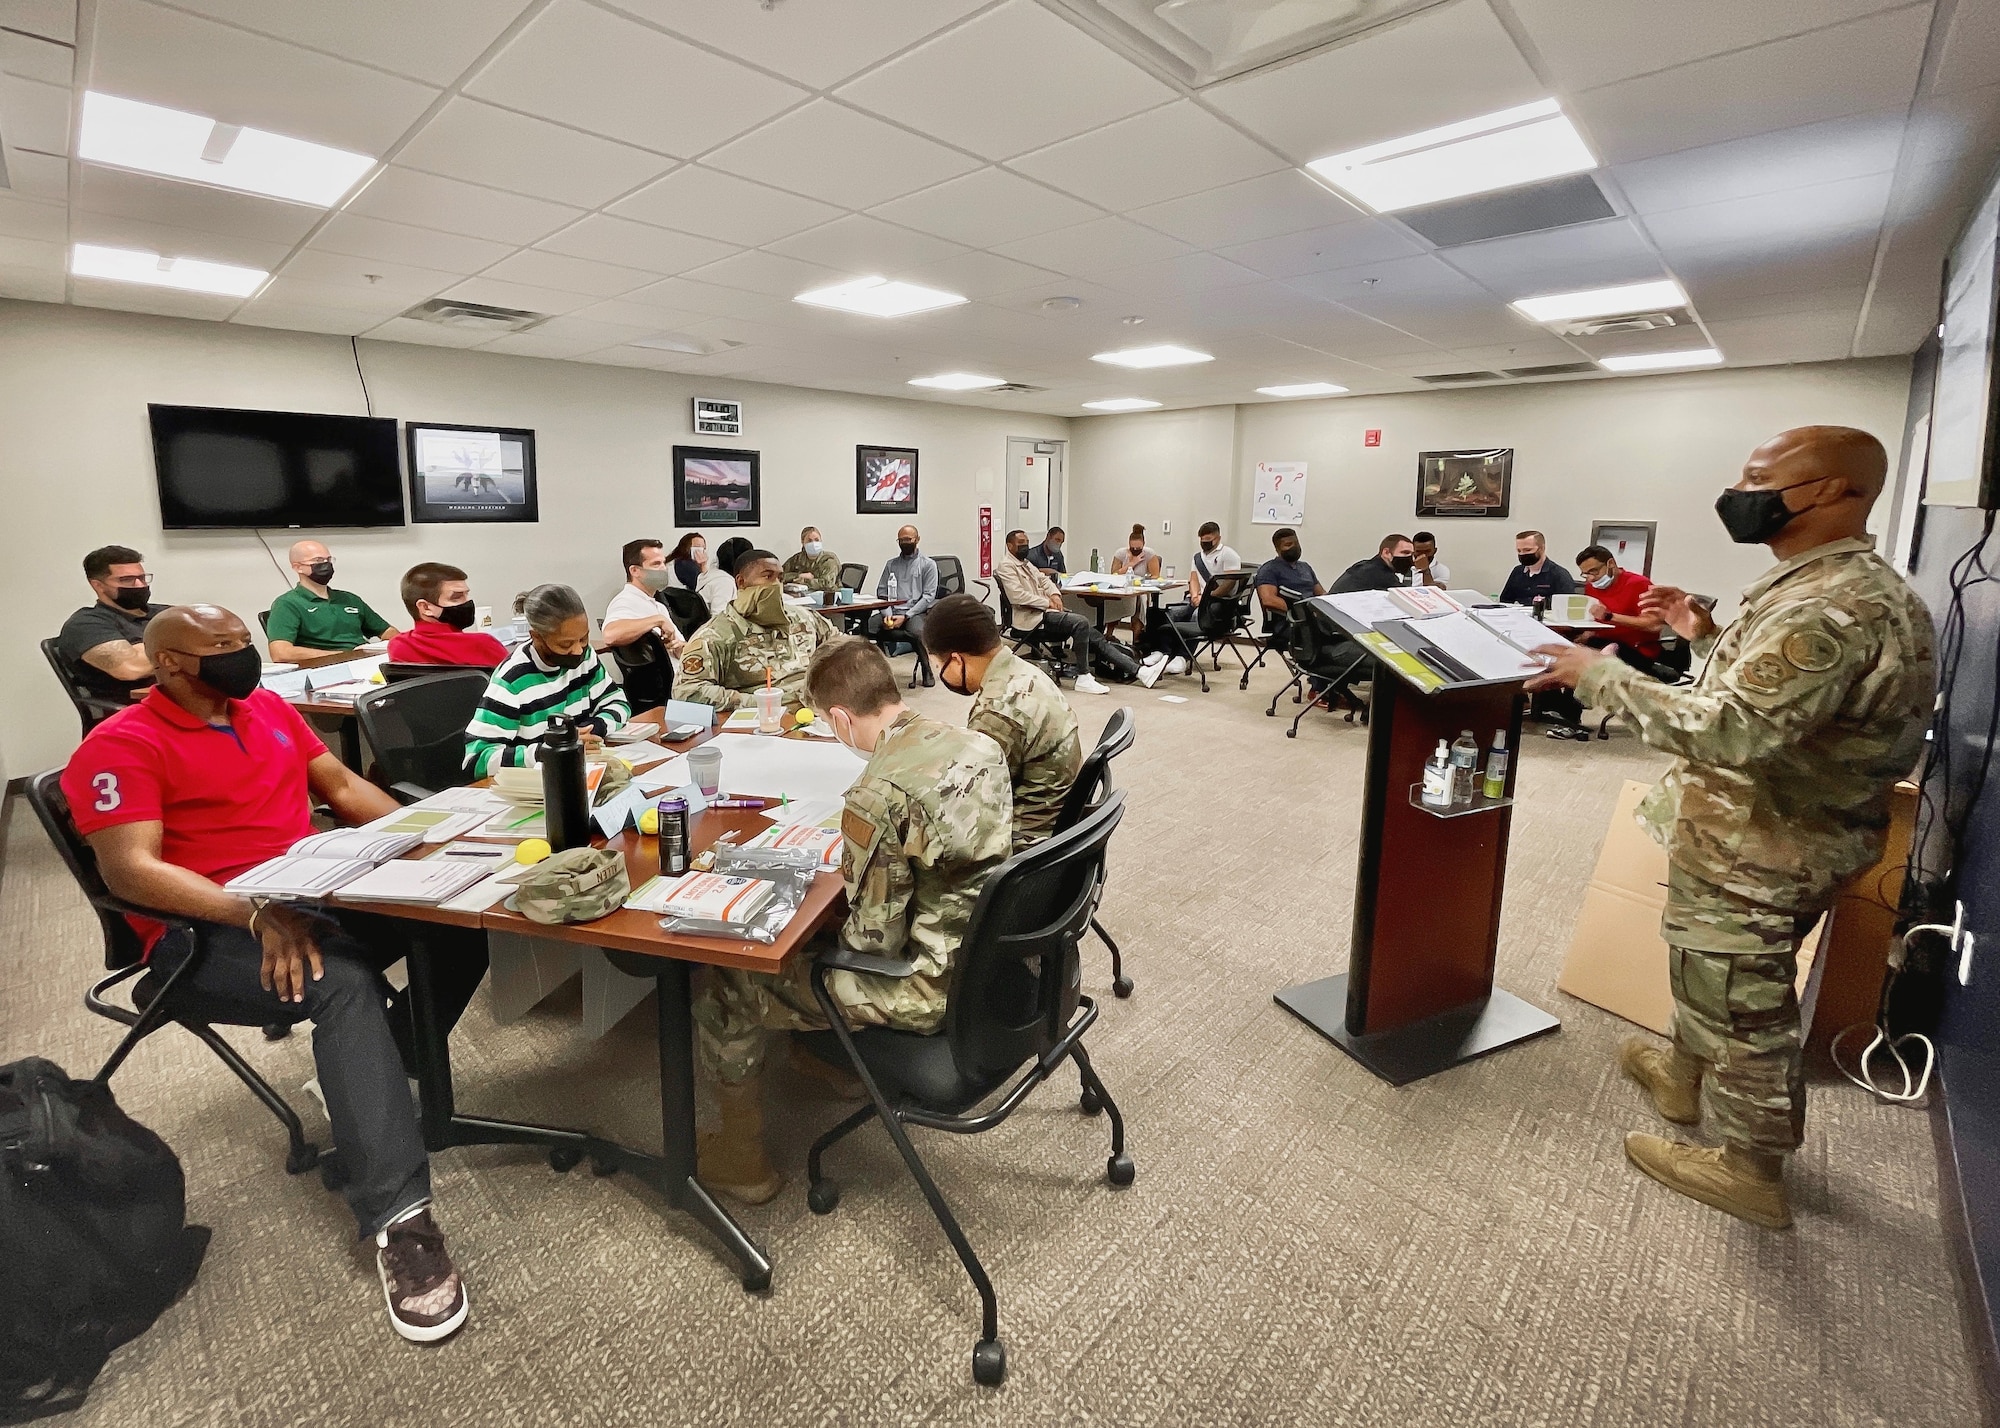 U.S. Air Force Tech. Sgt. Jose Lopez Rodriguez, Airman Leadership School (ALS) instructor, facilitates a professional military education class at MacDill Air Force Base, Florida, Oct. 27, 2021 during Professional Military Education week.